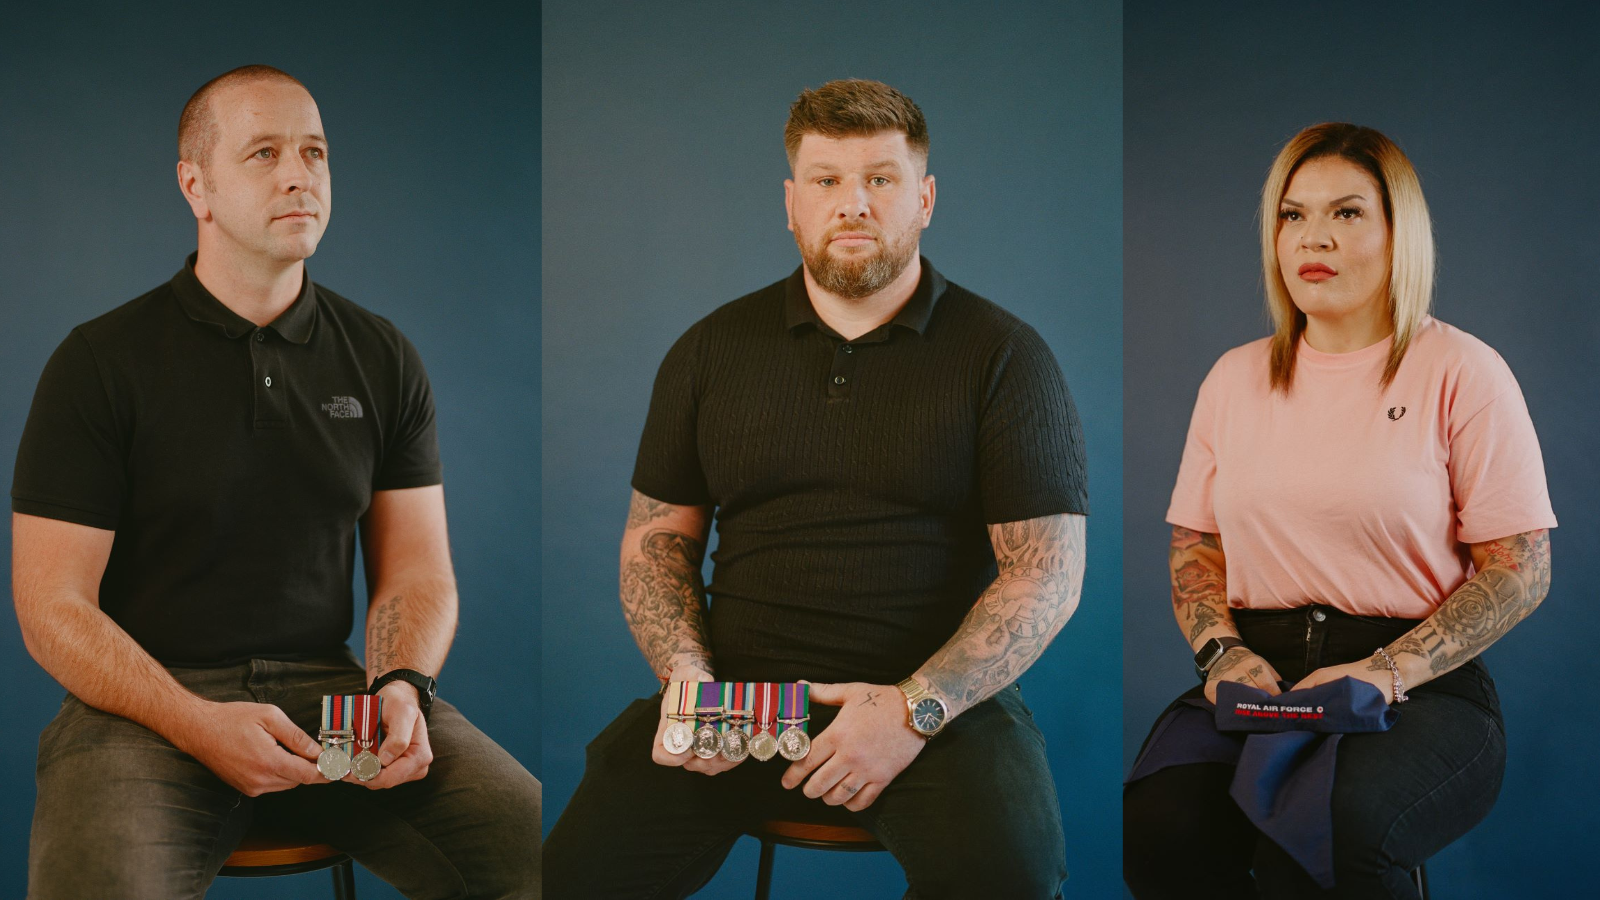 Photographs of Armed Forces veterans